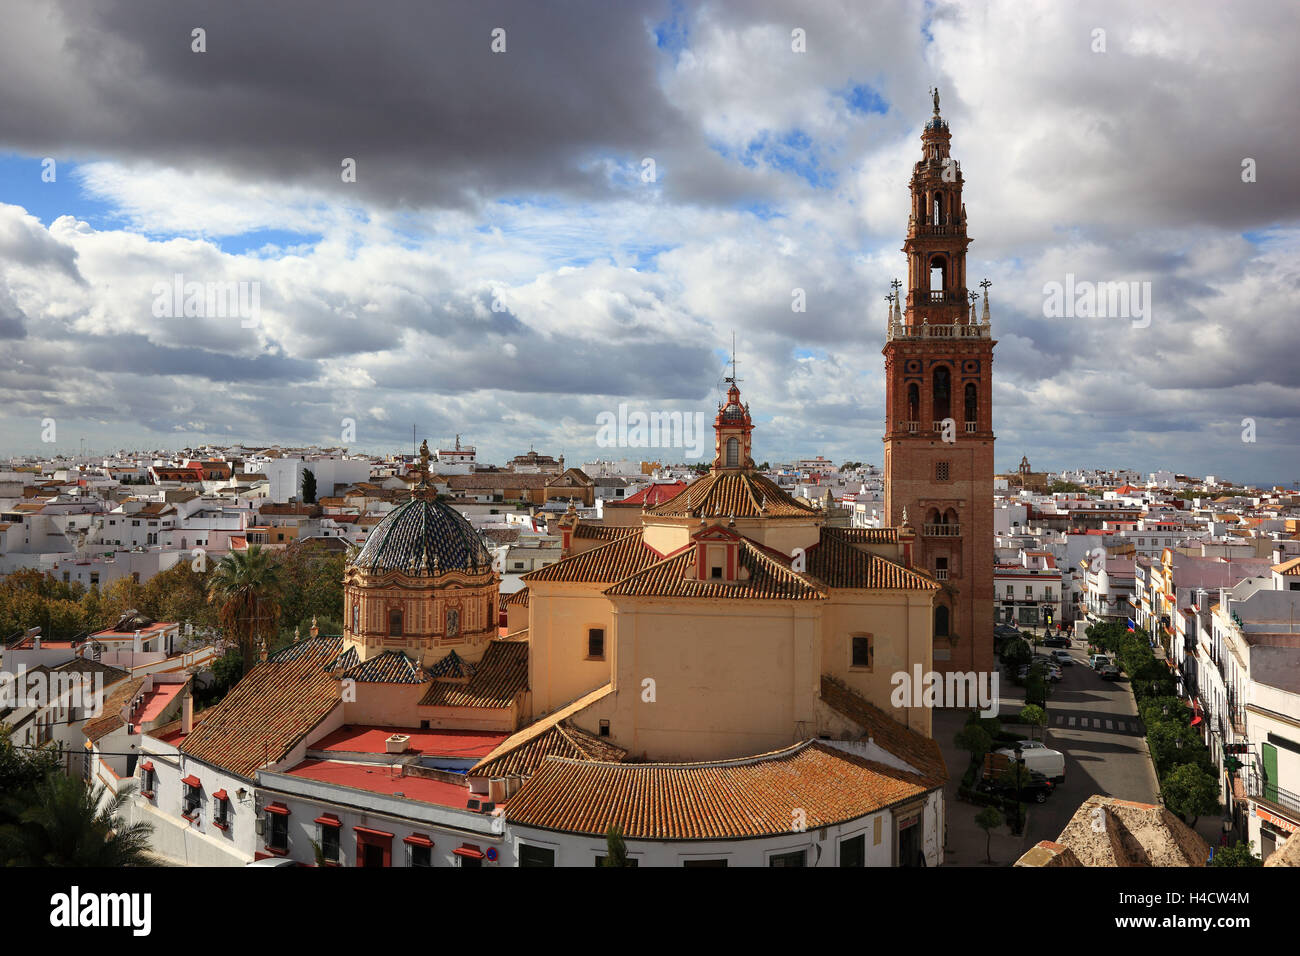 Spain, Andalusia, town Carmona in the province Seville, view from the Alkazar de la Puerta de Seville aud the Old Town and the cathedral San Pedro Stock Photo